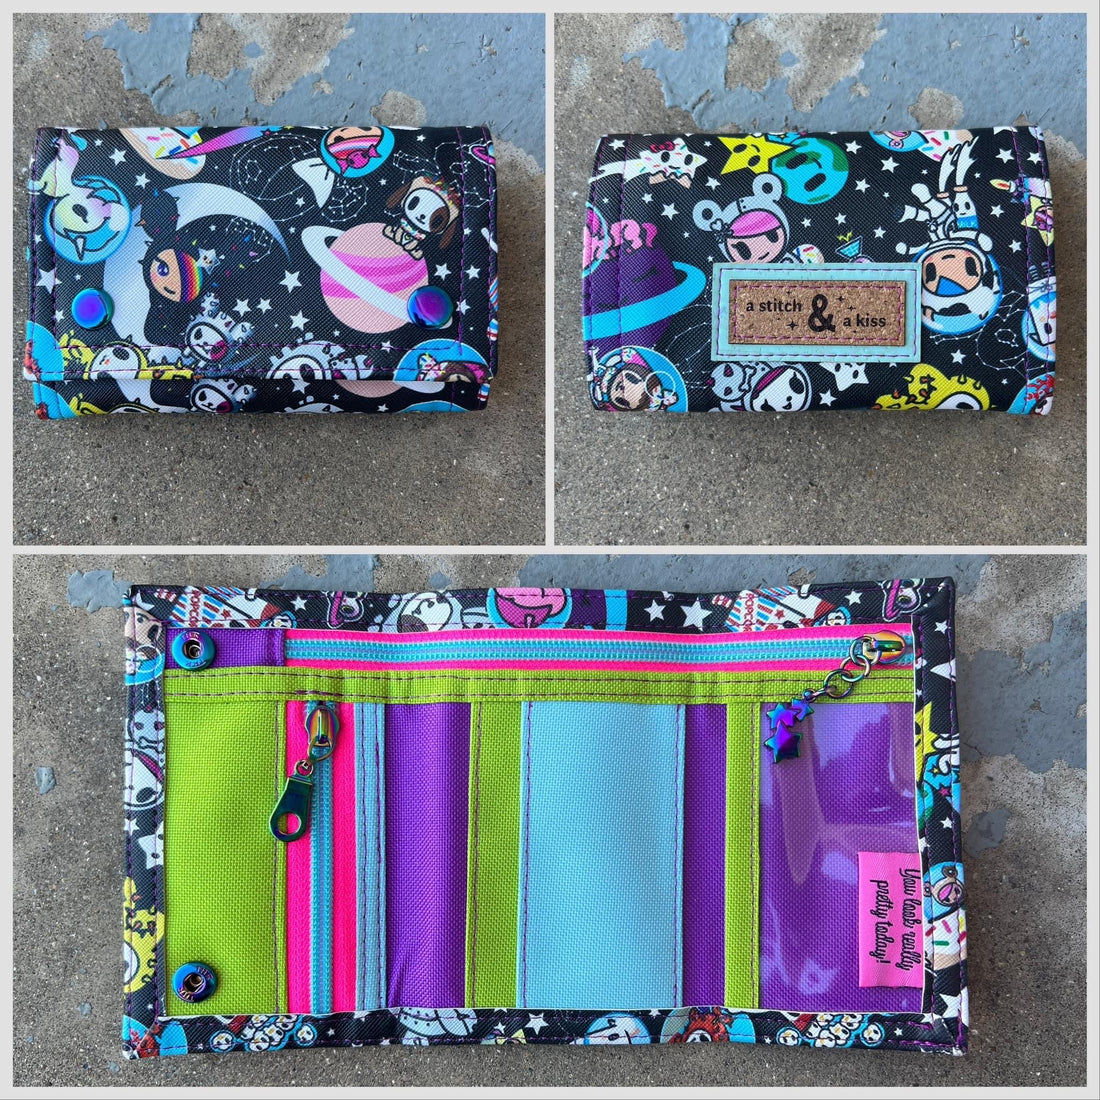 Andrew Trifold Wallet PDF Sewing Pattern (includes SVGs, A0, Projector Files and video!)